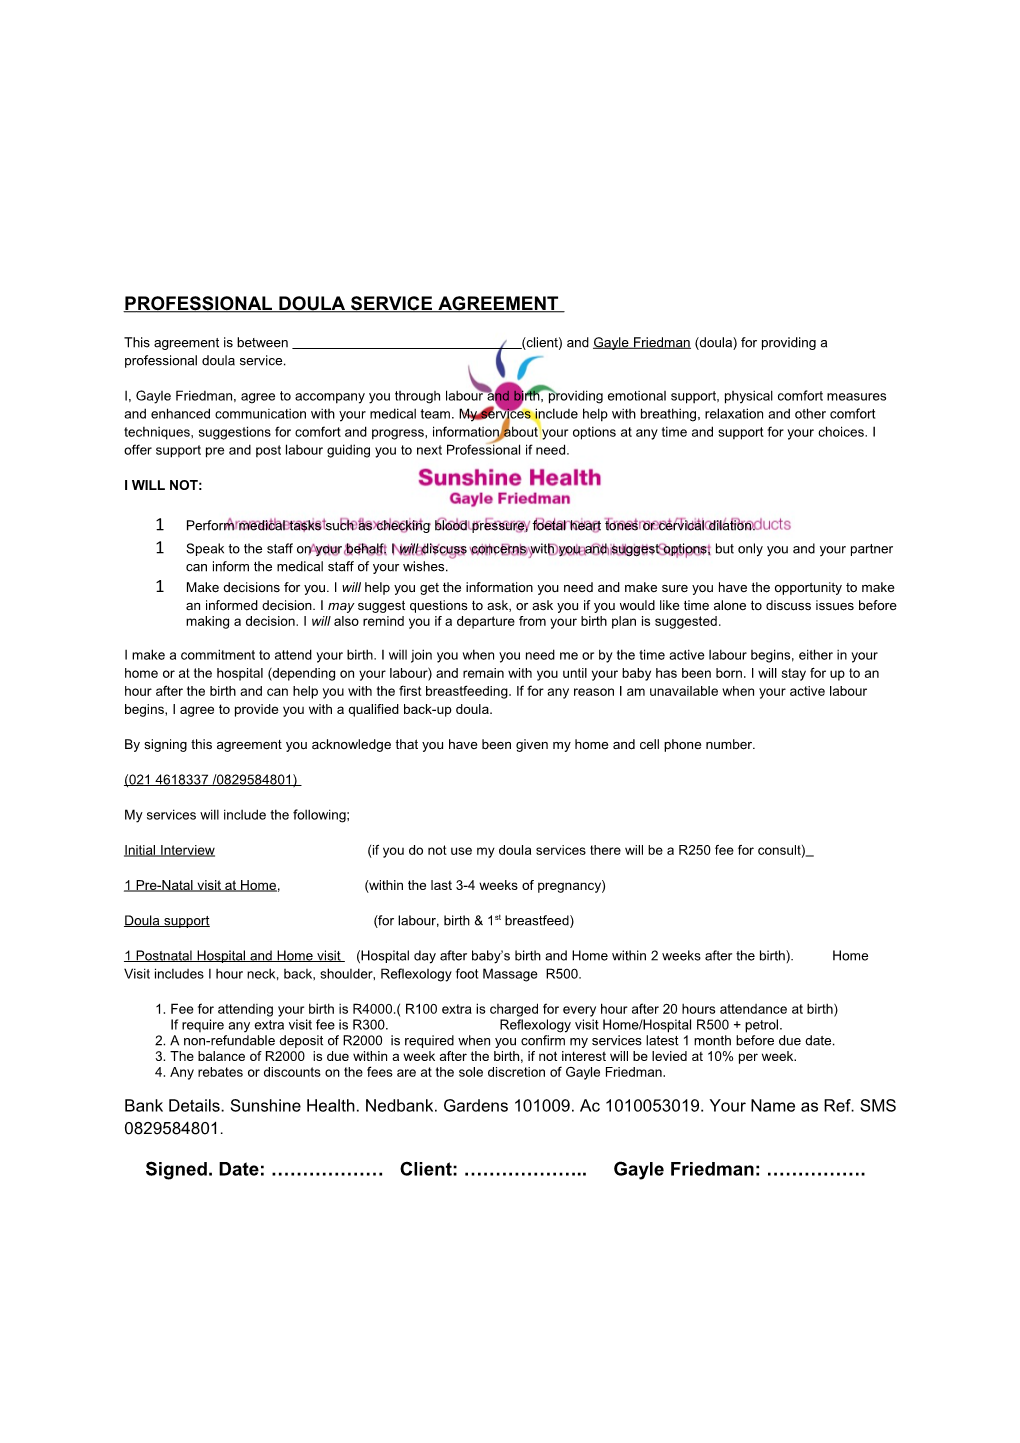 Professional Doula Service Agreement